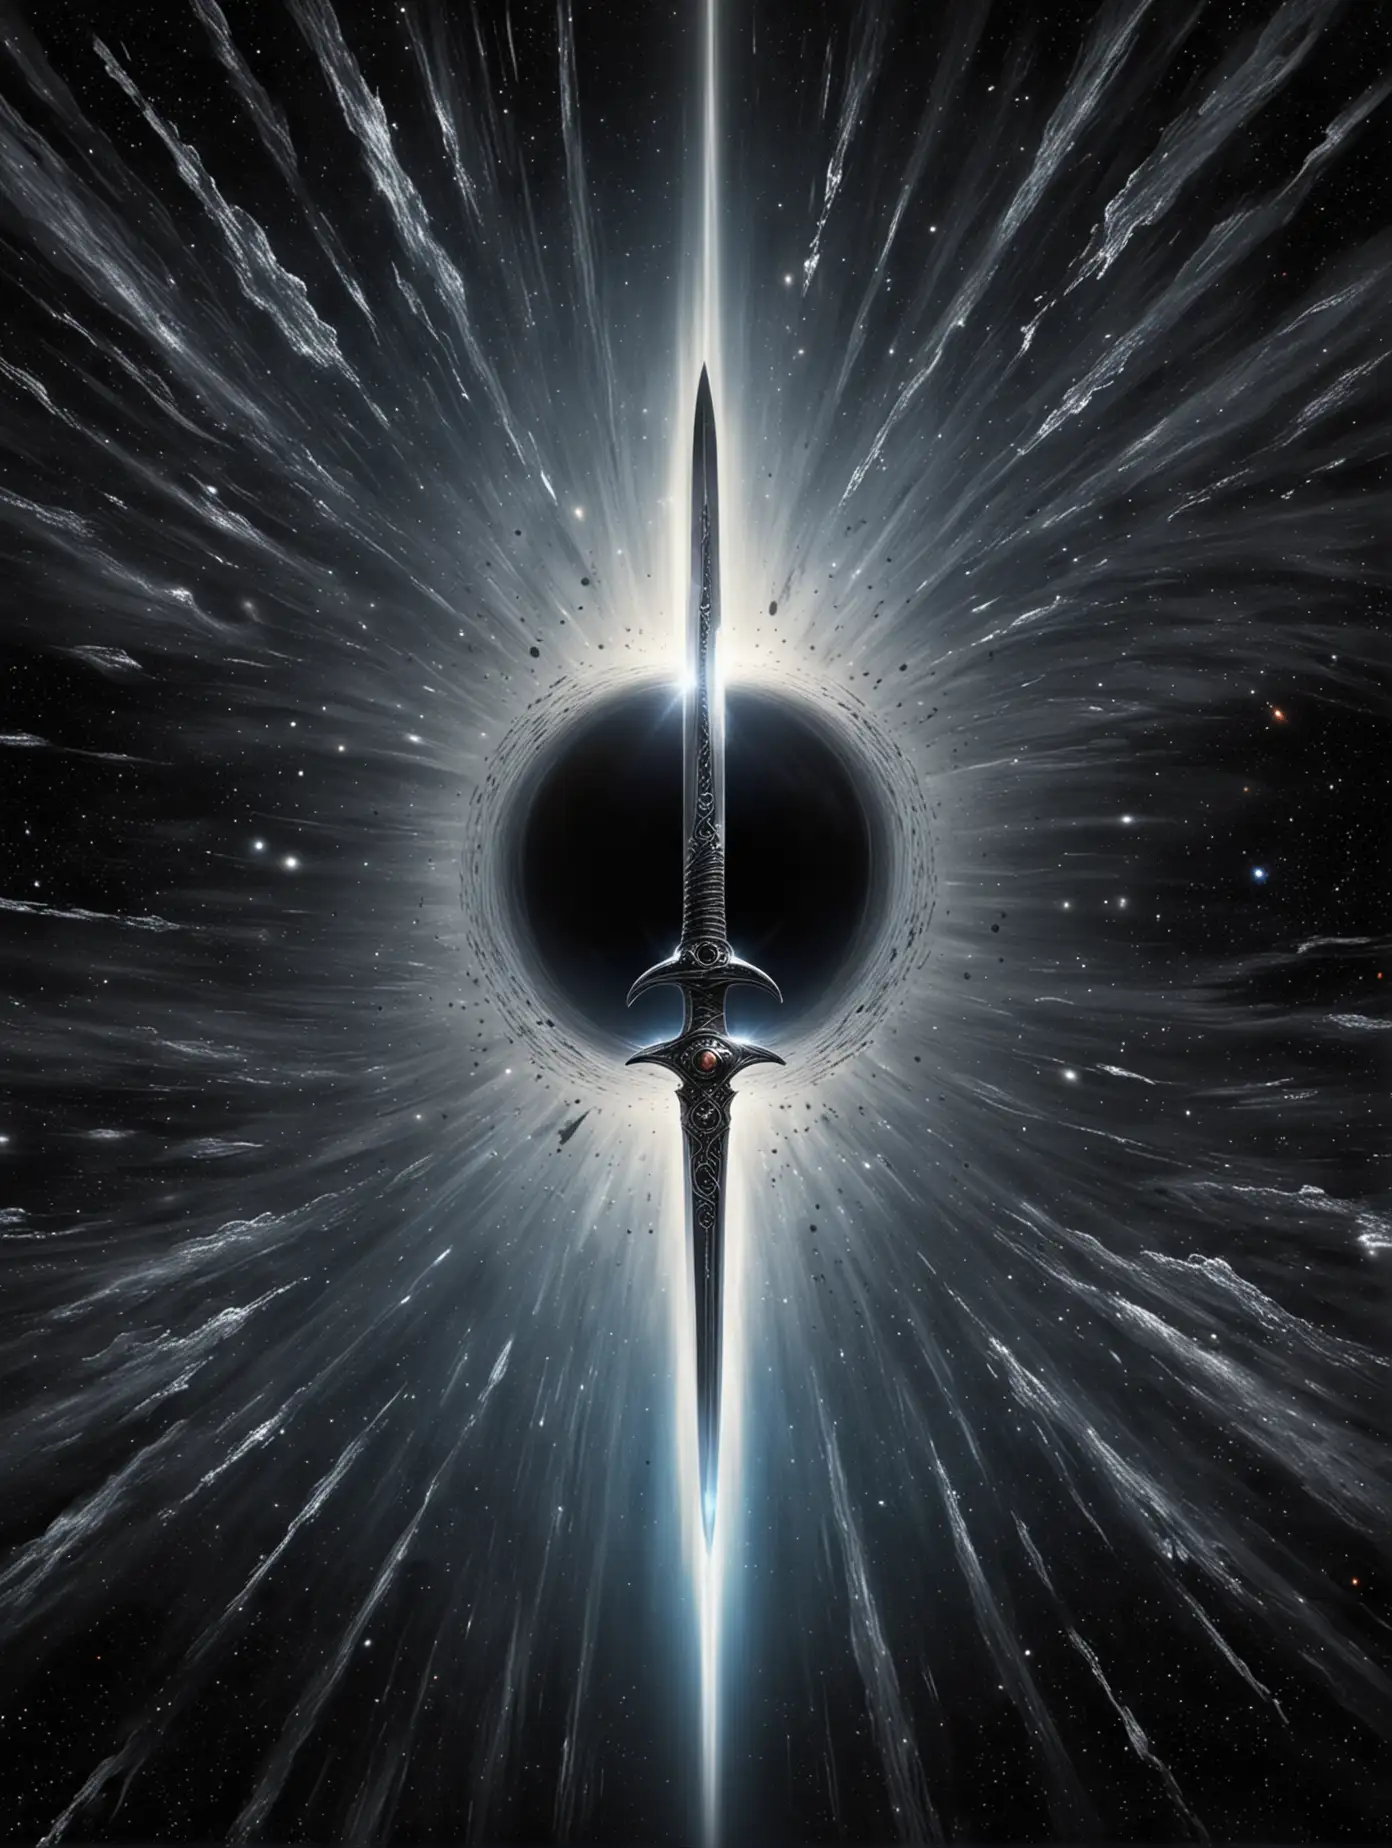 Cosmic-Black-Hole-with-Silver-Sword-at-Event-Horizon